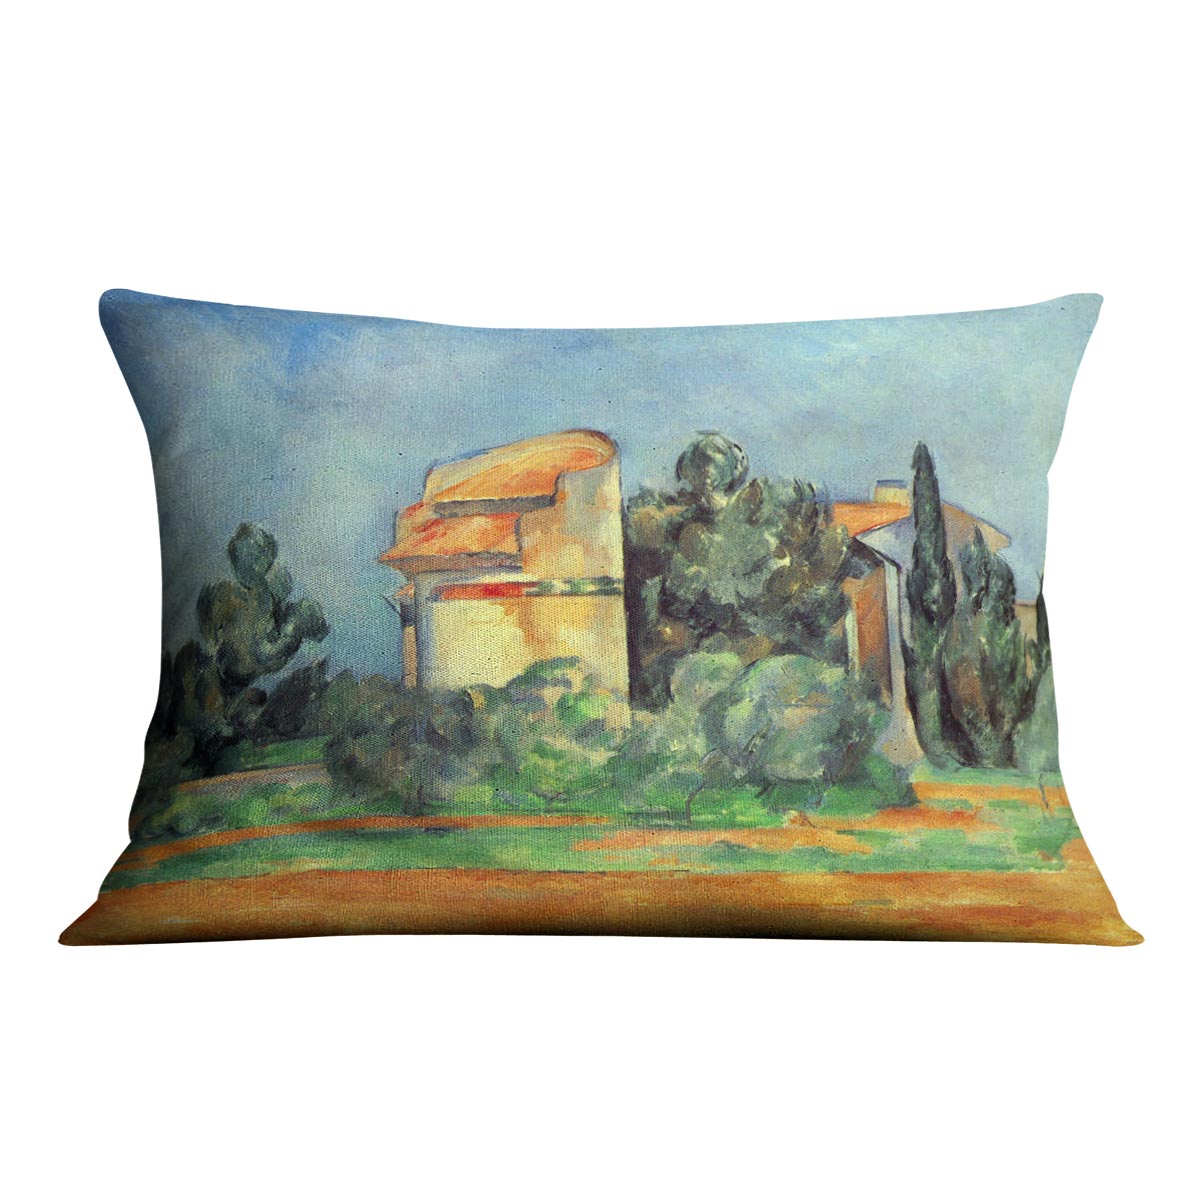 Pigeonry in Bellvue by Cezanne Cushion